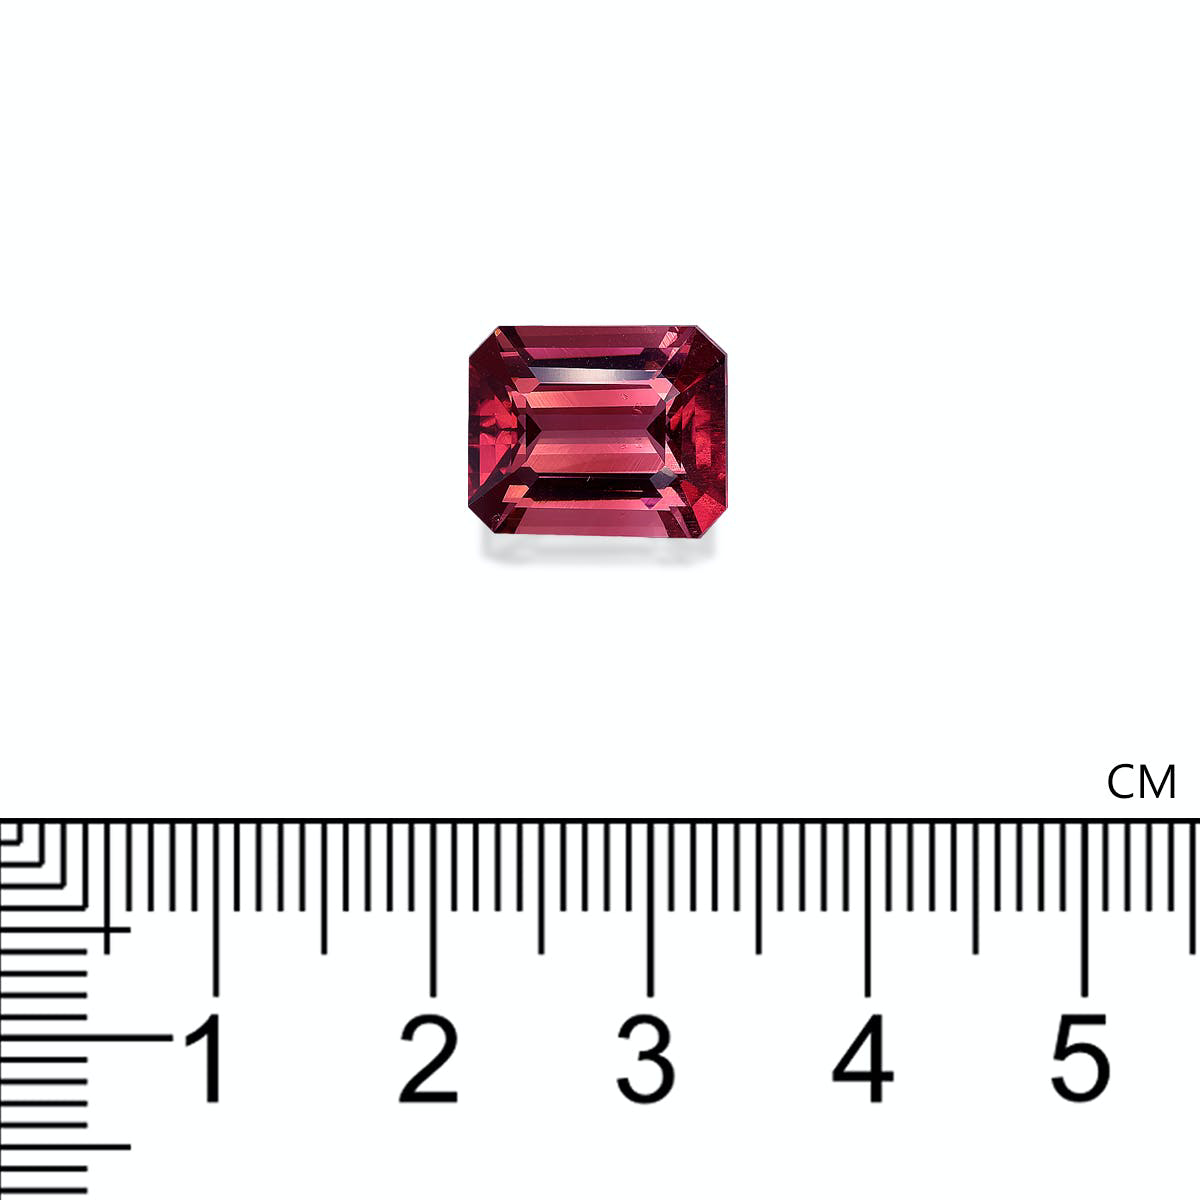 Picture of Rosewood Pink Tourmaline 5.73ct (PT1241)